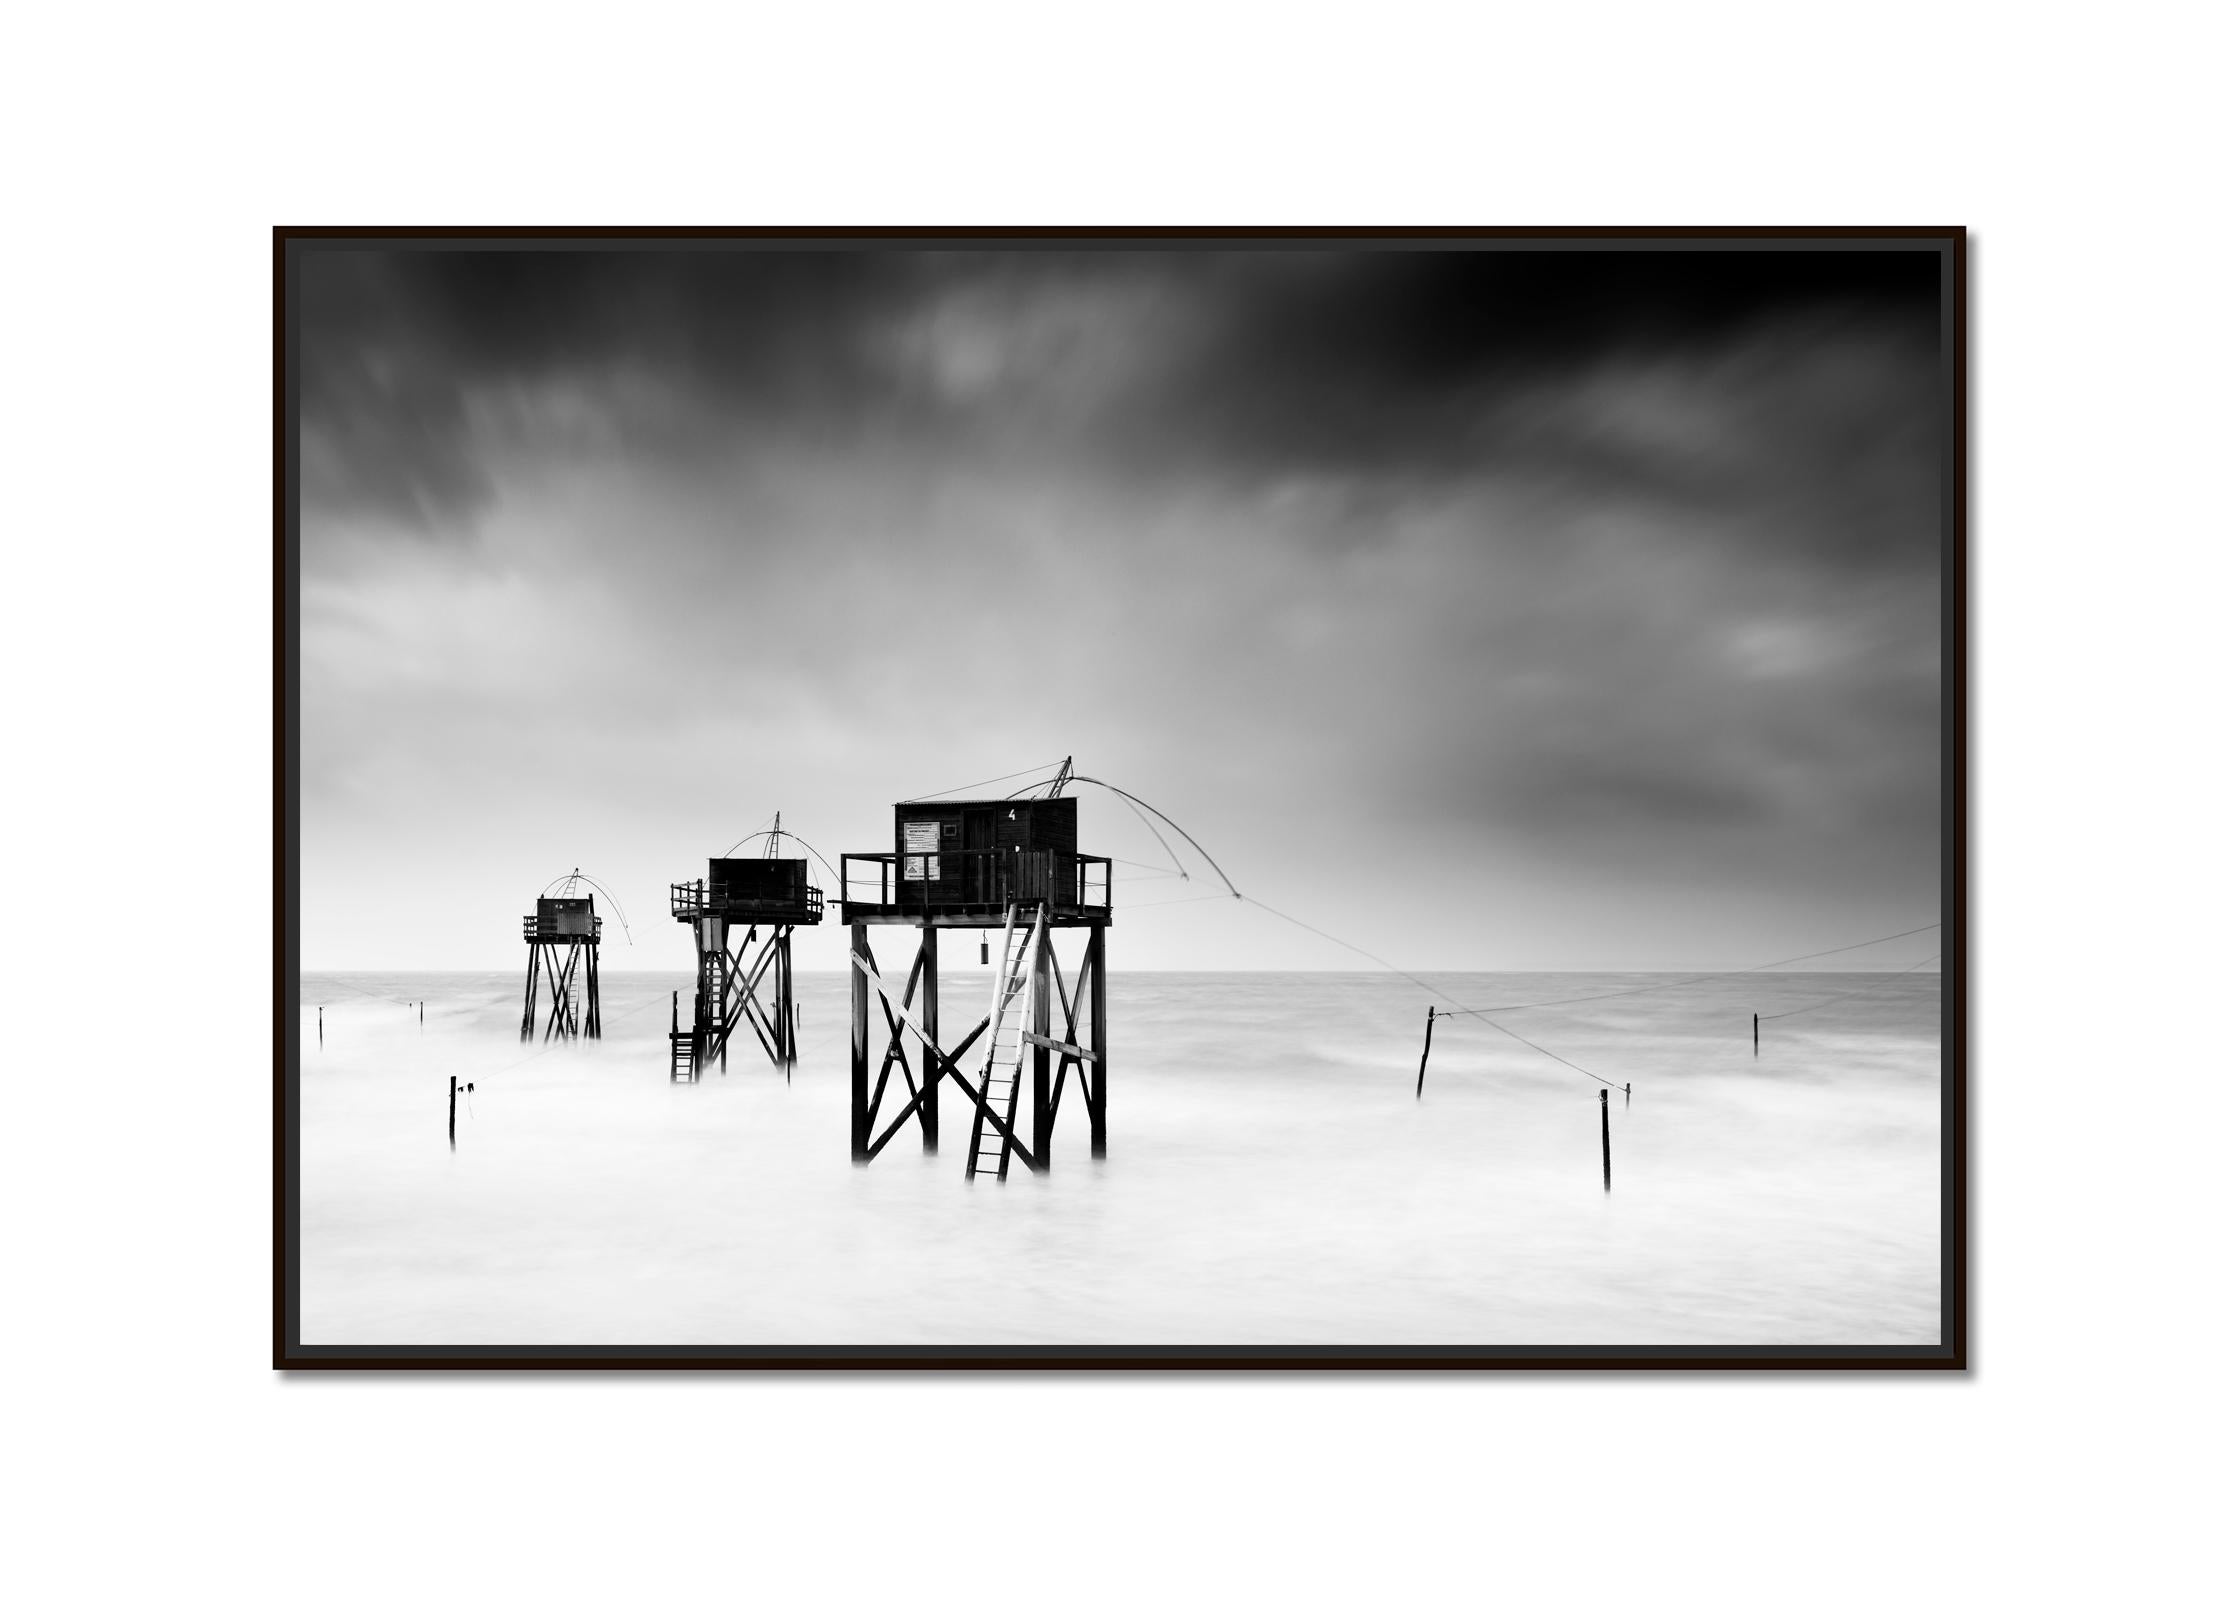 Fishing Hut On Stilts Panorama,  stormy, Atlantic Ocean, France, black and white - Photograph by Gerald Berghammer